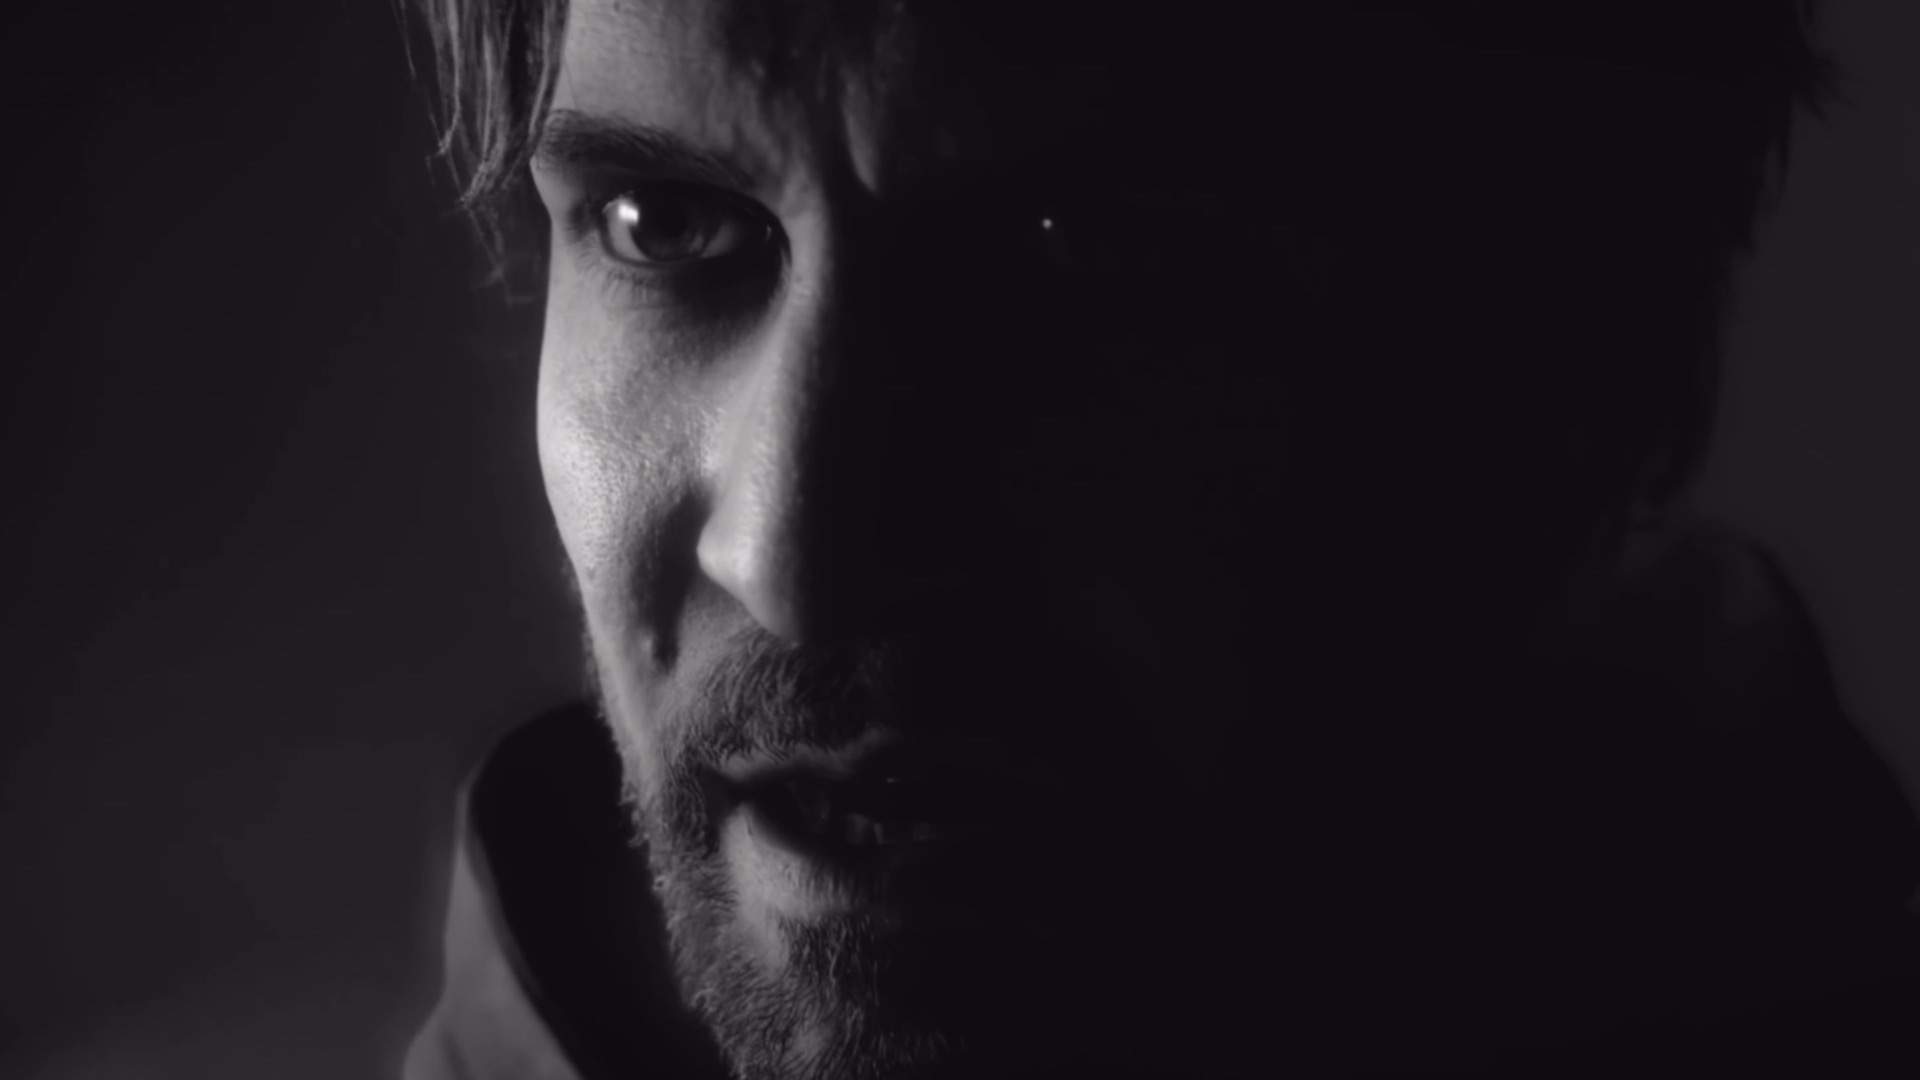 A live-action image of Alan Wake in black in white, shrouded in darkness